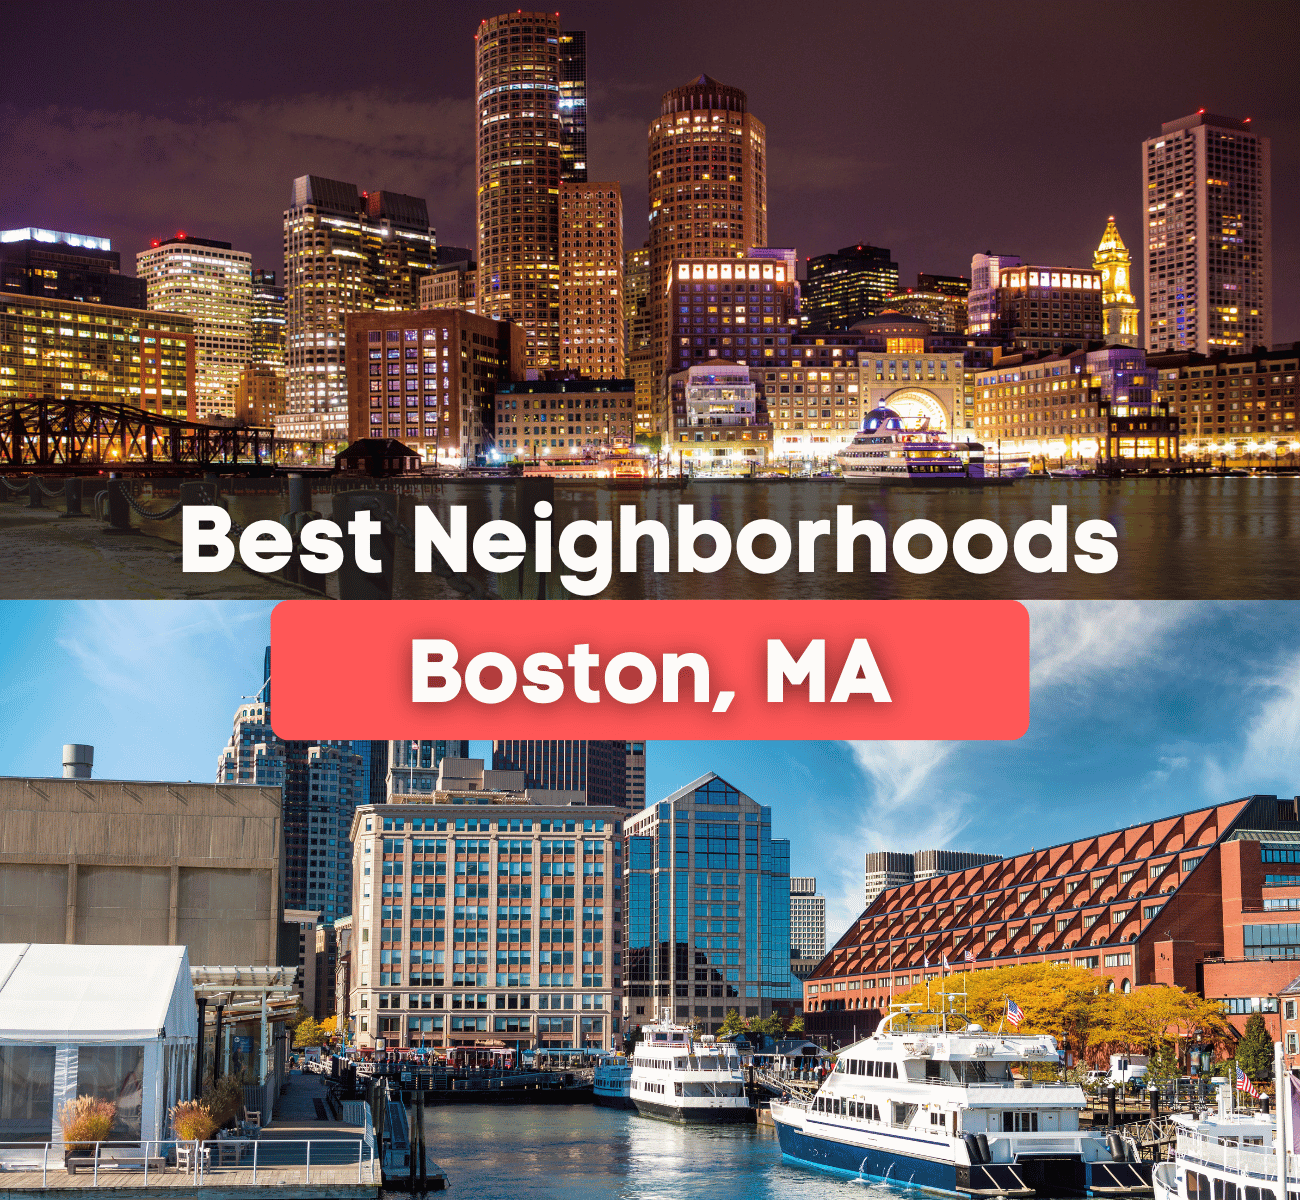 best neighborhoods Boston, MA - city of Boston at night and near the water with boats